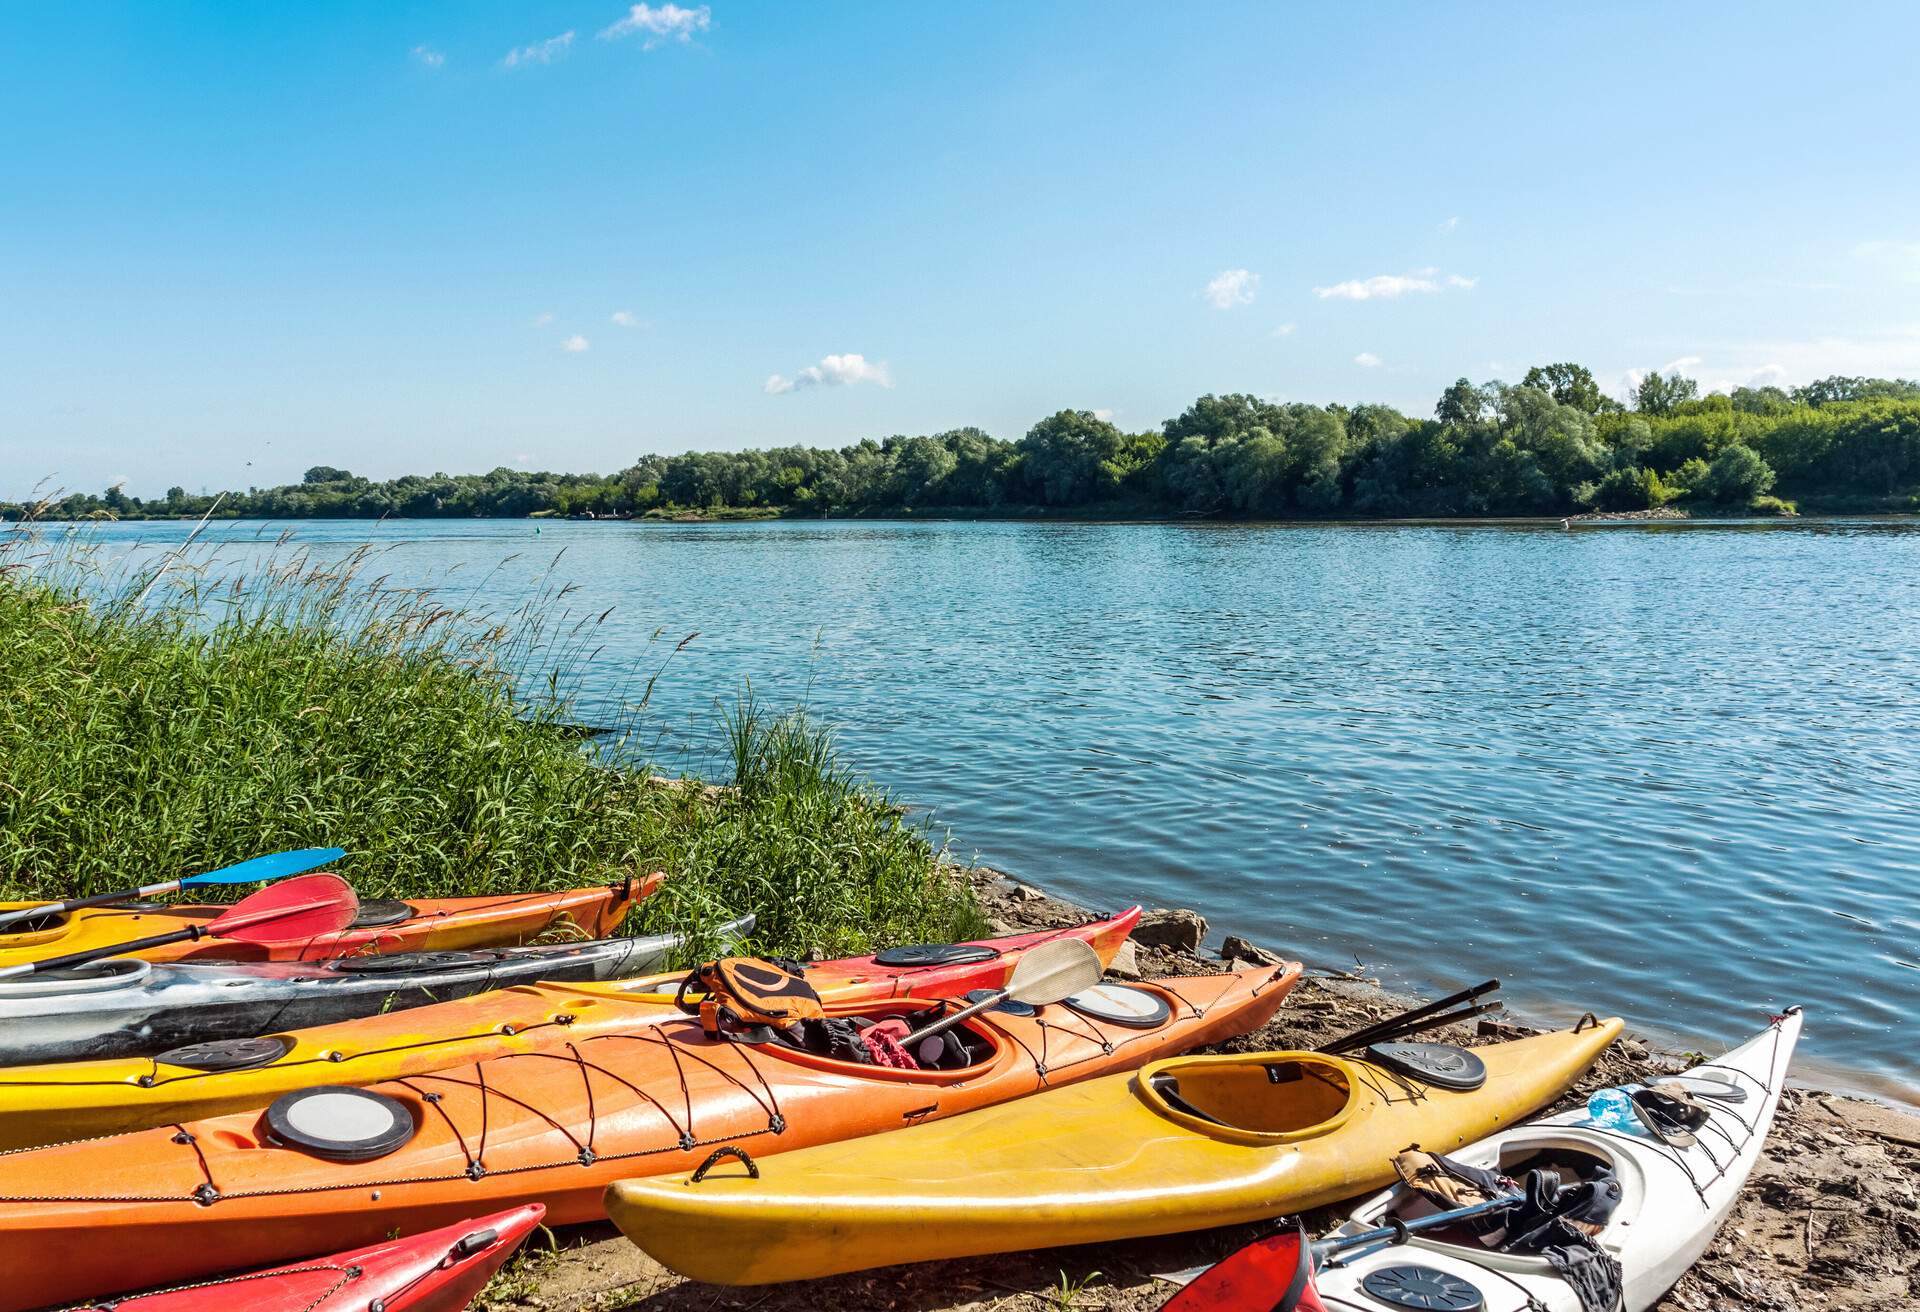 Colorful kayaks on Wisa riverbank in Bielany district of Warsaw, Poland